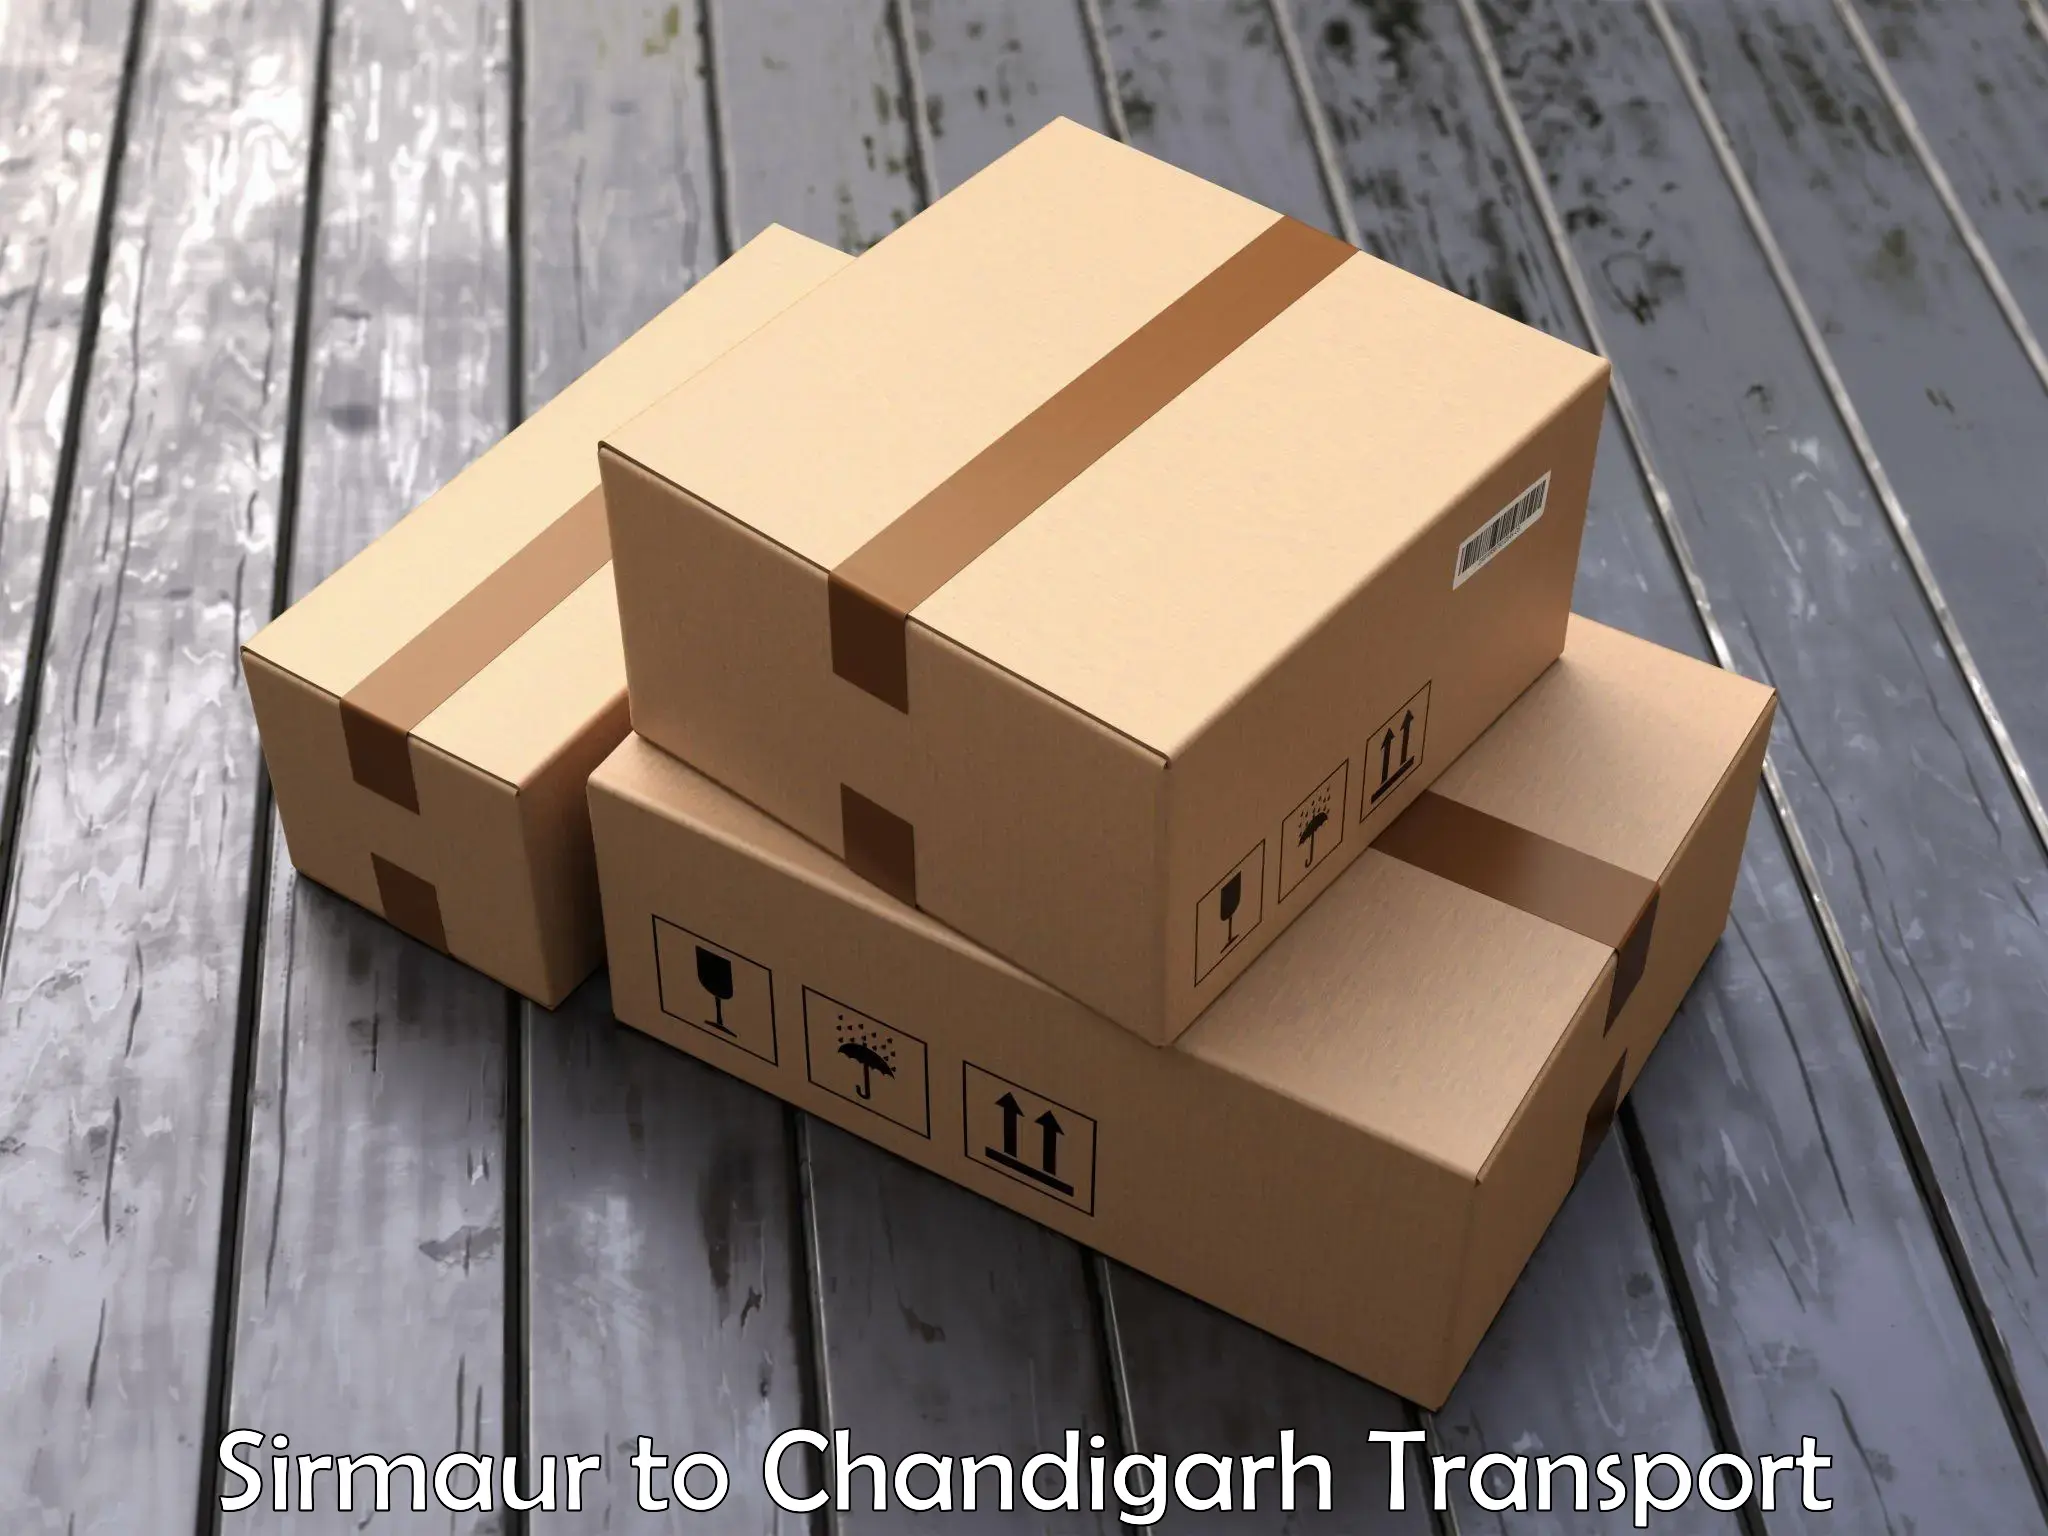 Truck transport companies in India Sirmaur to Chandigarh